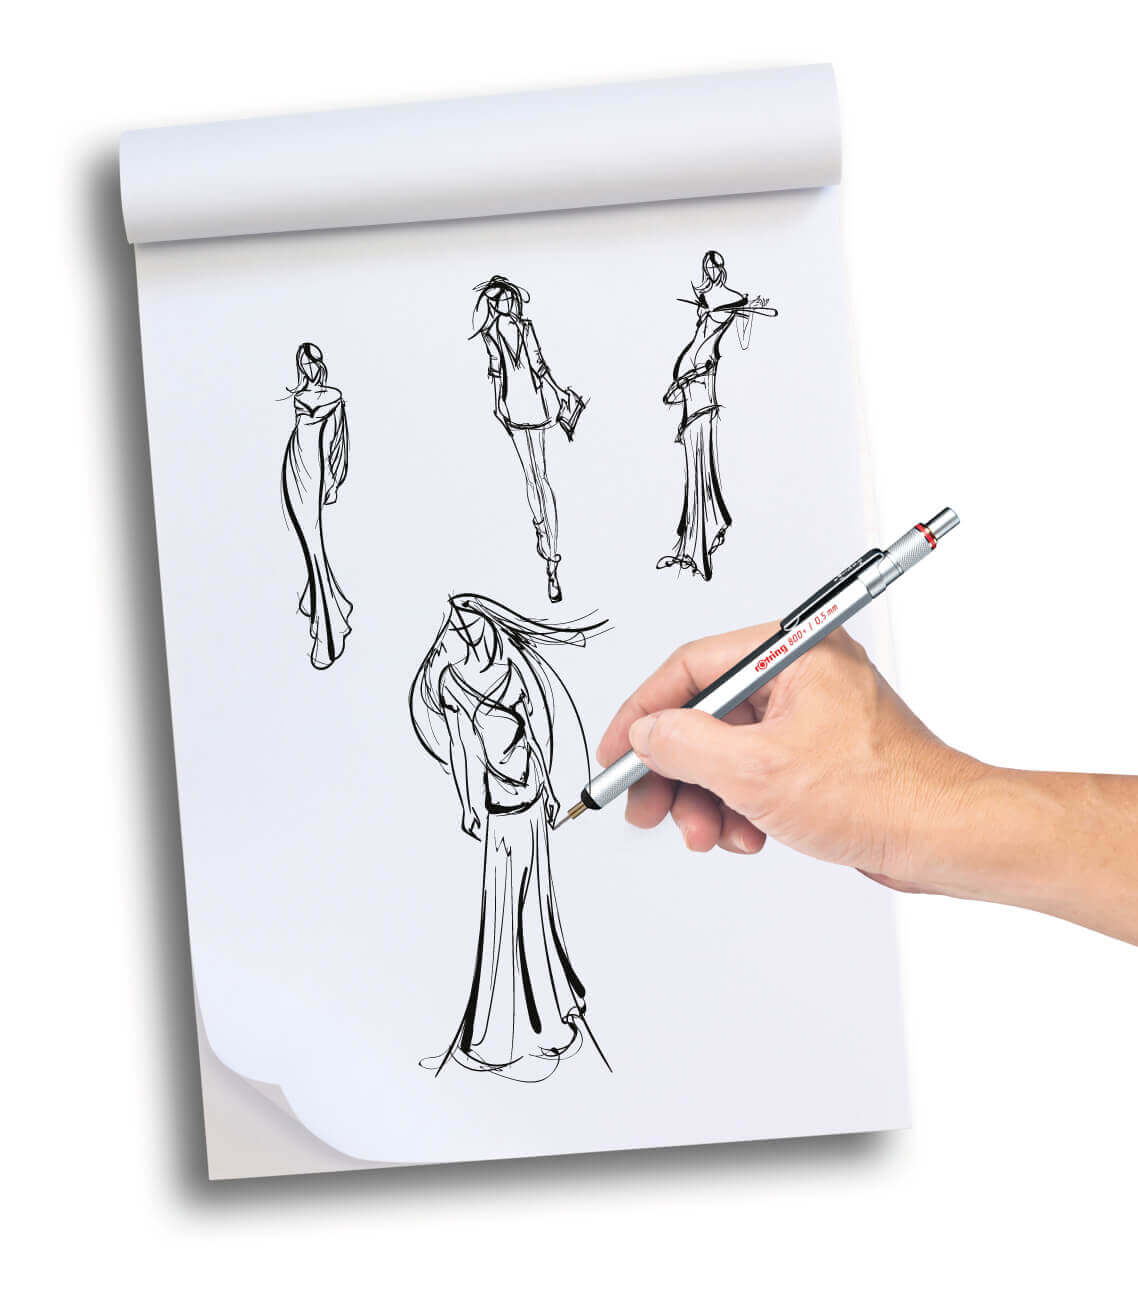 Creative Drawing Ideas For Beginners  cool drawing idea